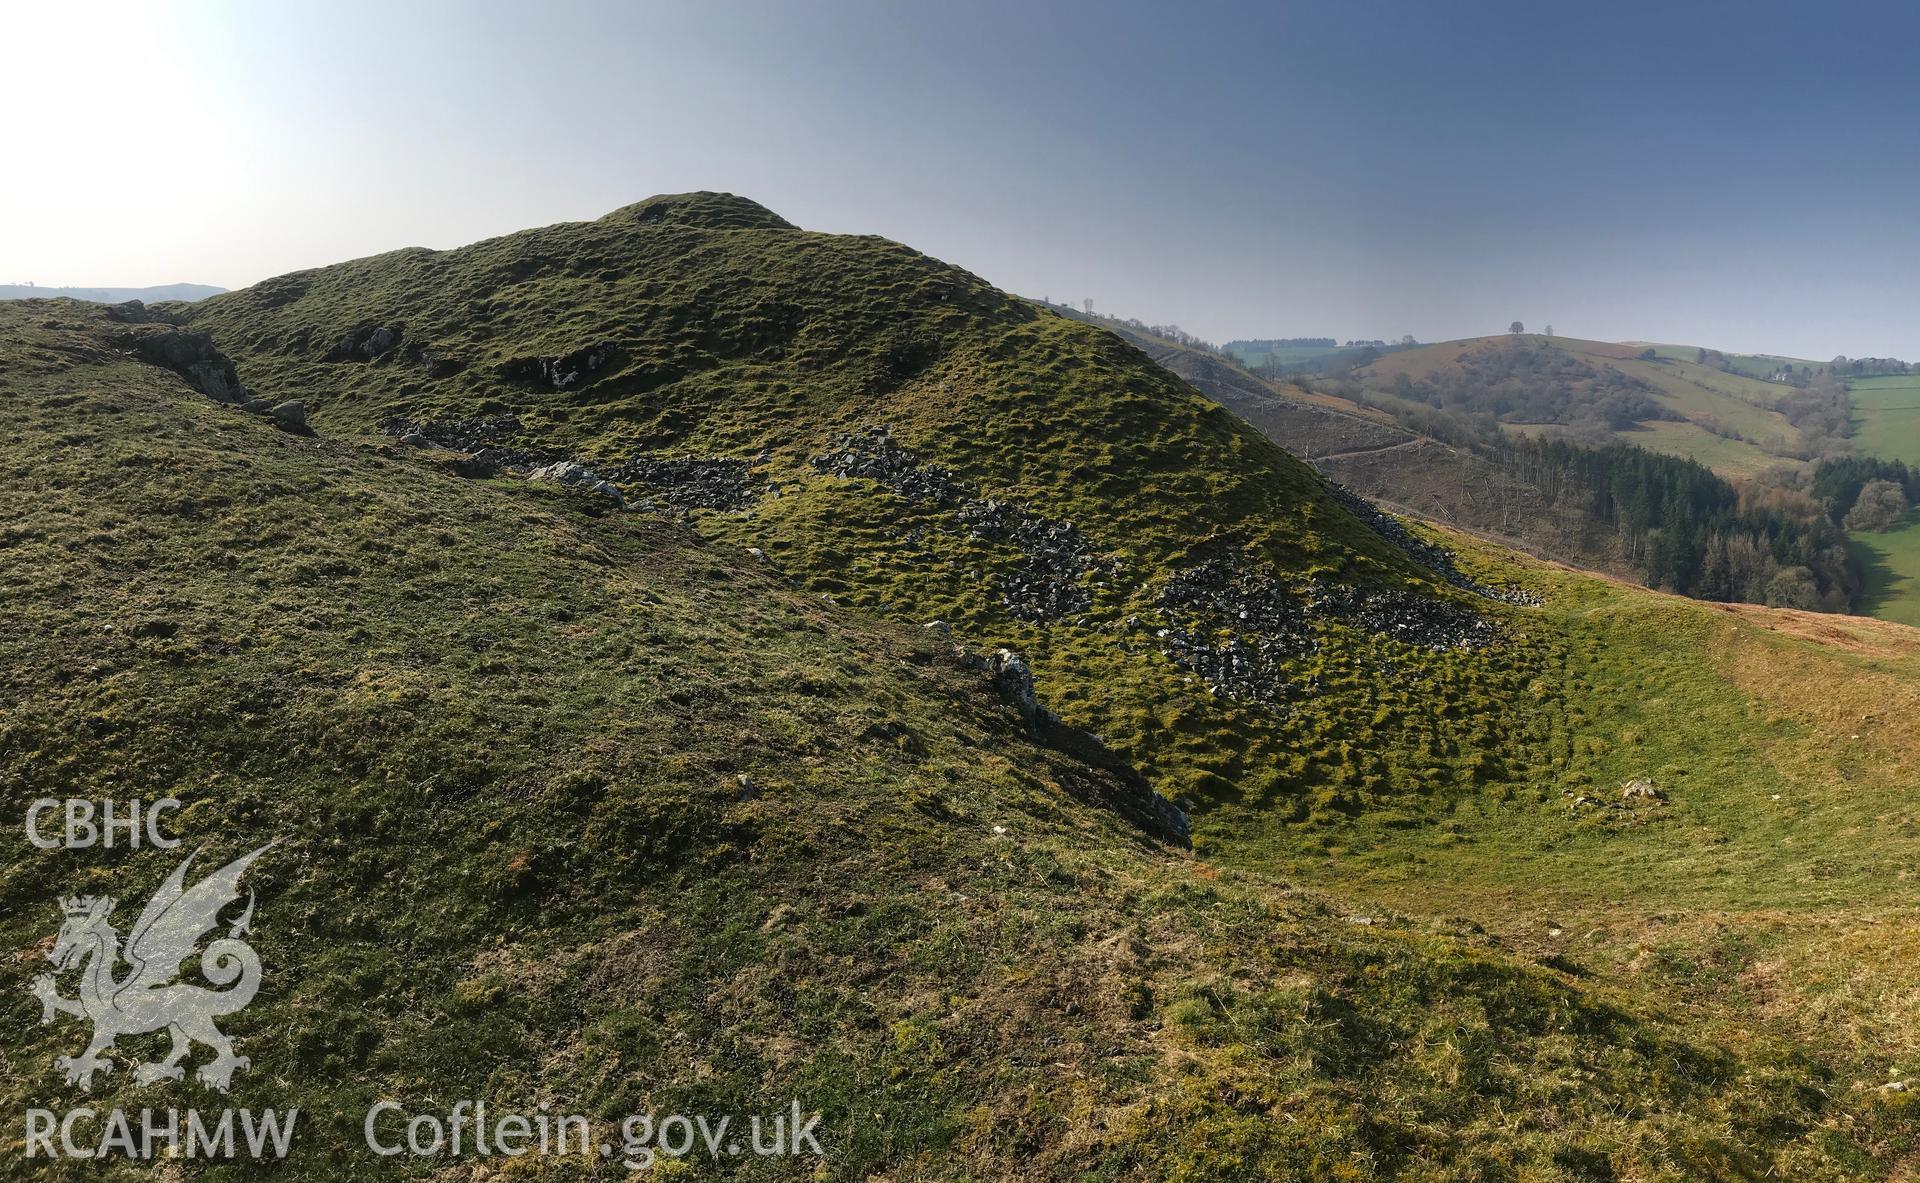 Colour photograph of Cefnllys Castle, east of Llandrindod Wells, taken by Paul R. Davis on 30th March 2019.